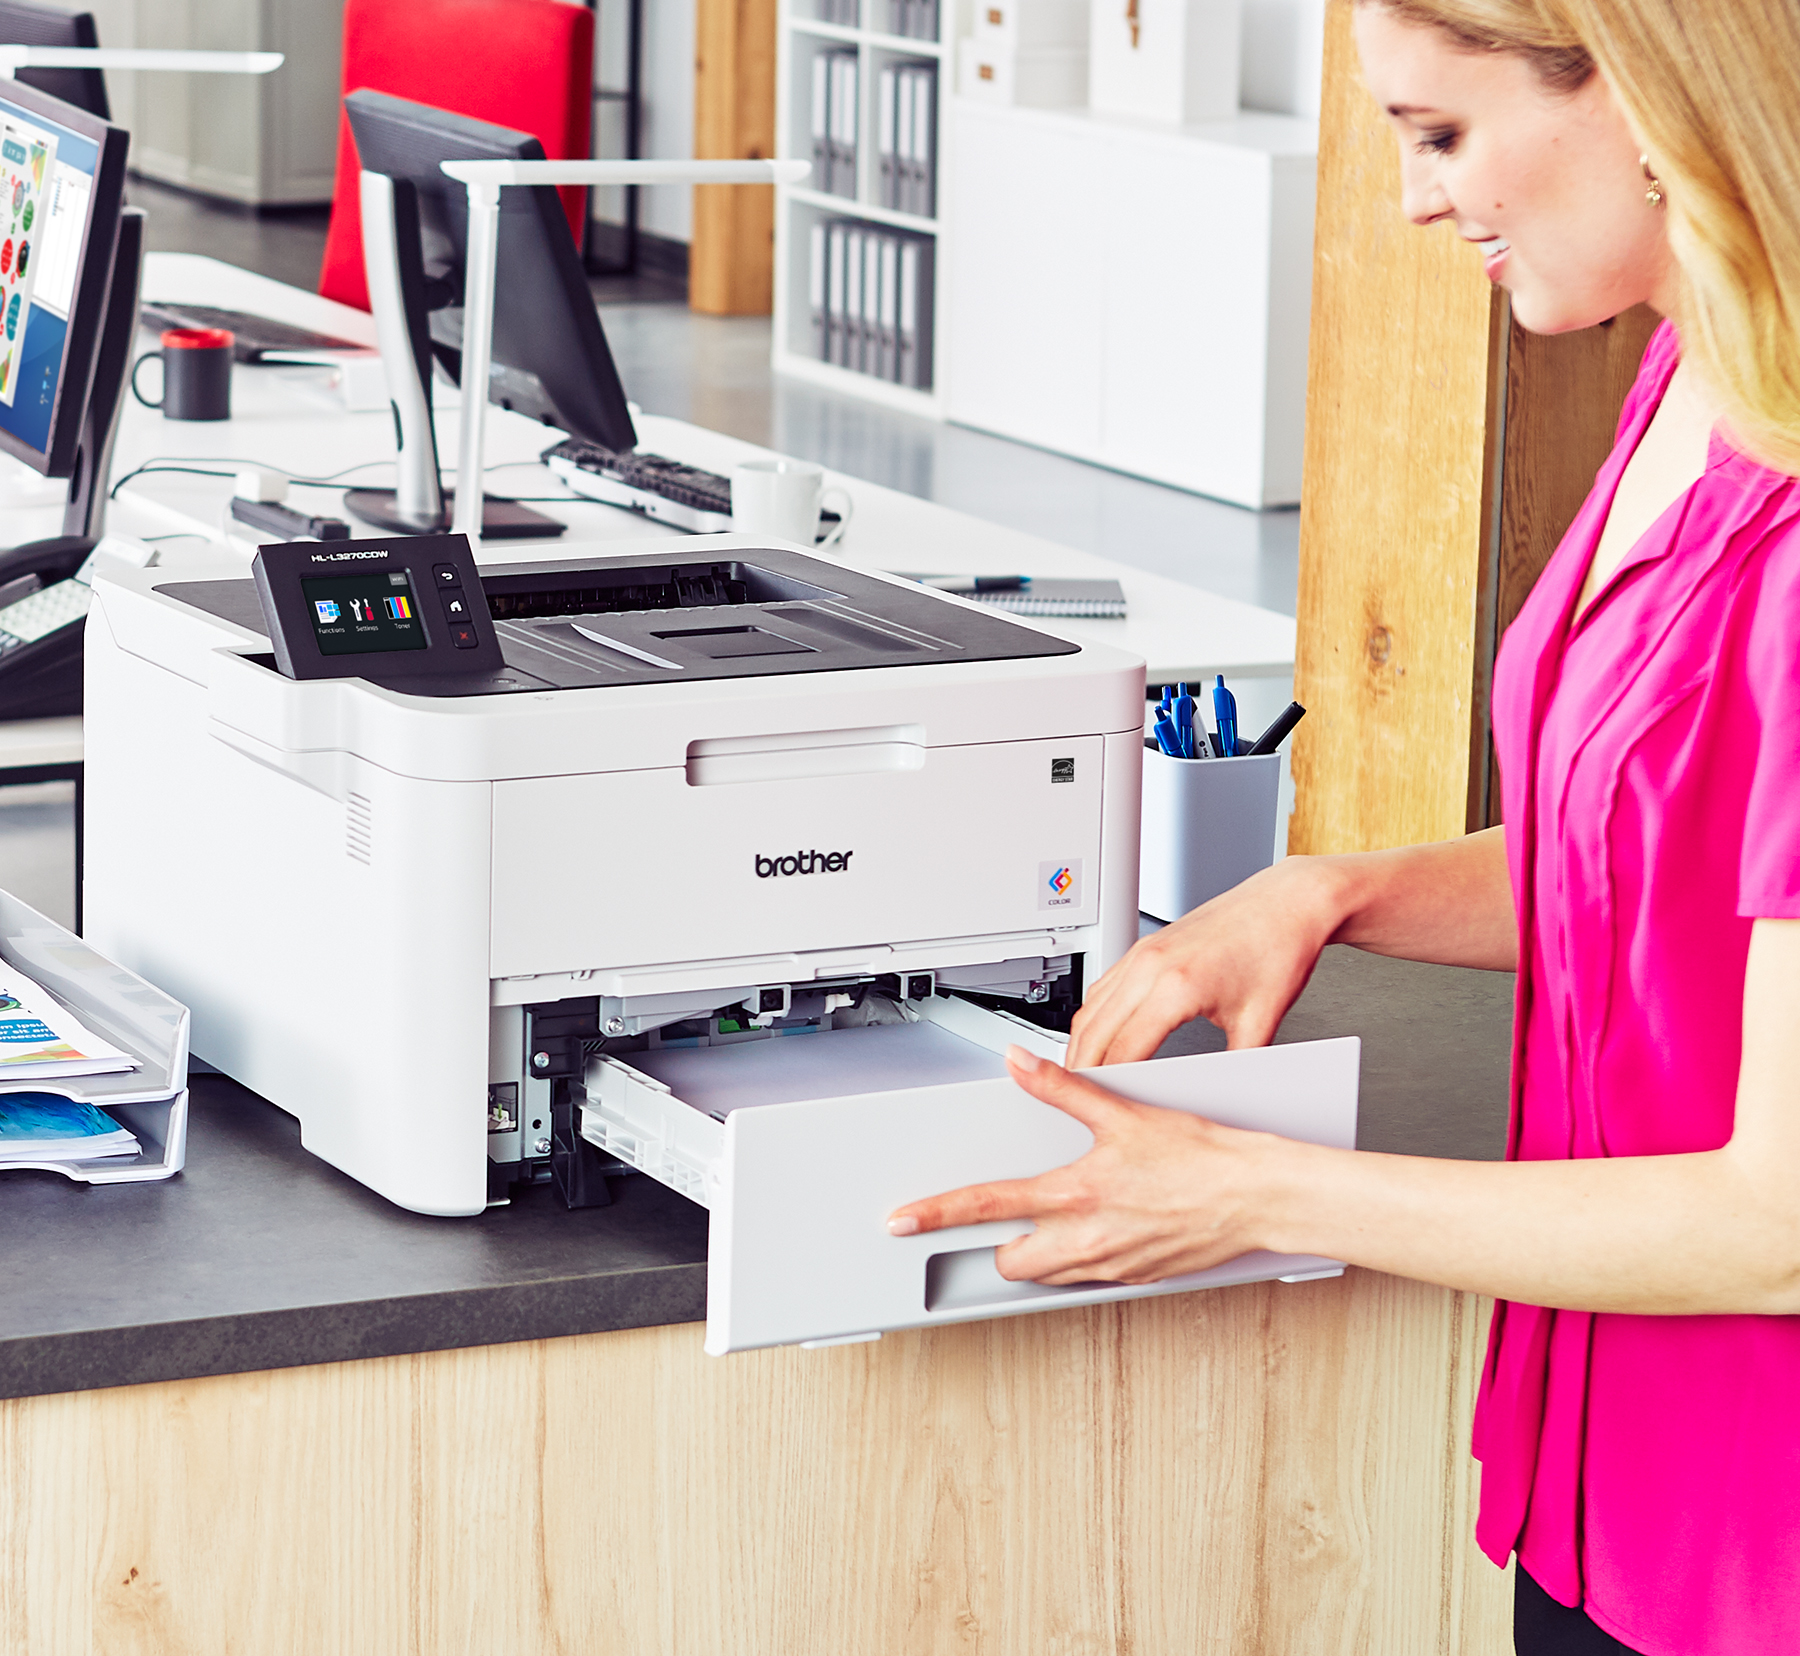 Brother HL-L3270CDW Compact Digital Color Printer Providing Laser Quality Results with NFC, Wireless and Duplex Printing - image 7 of 9